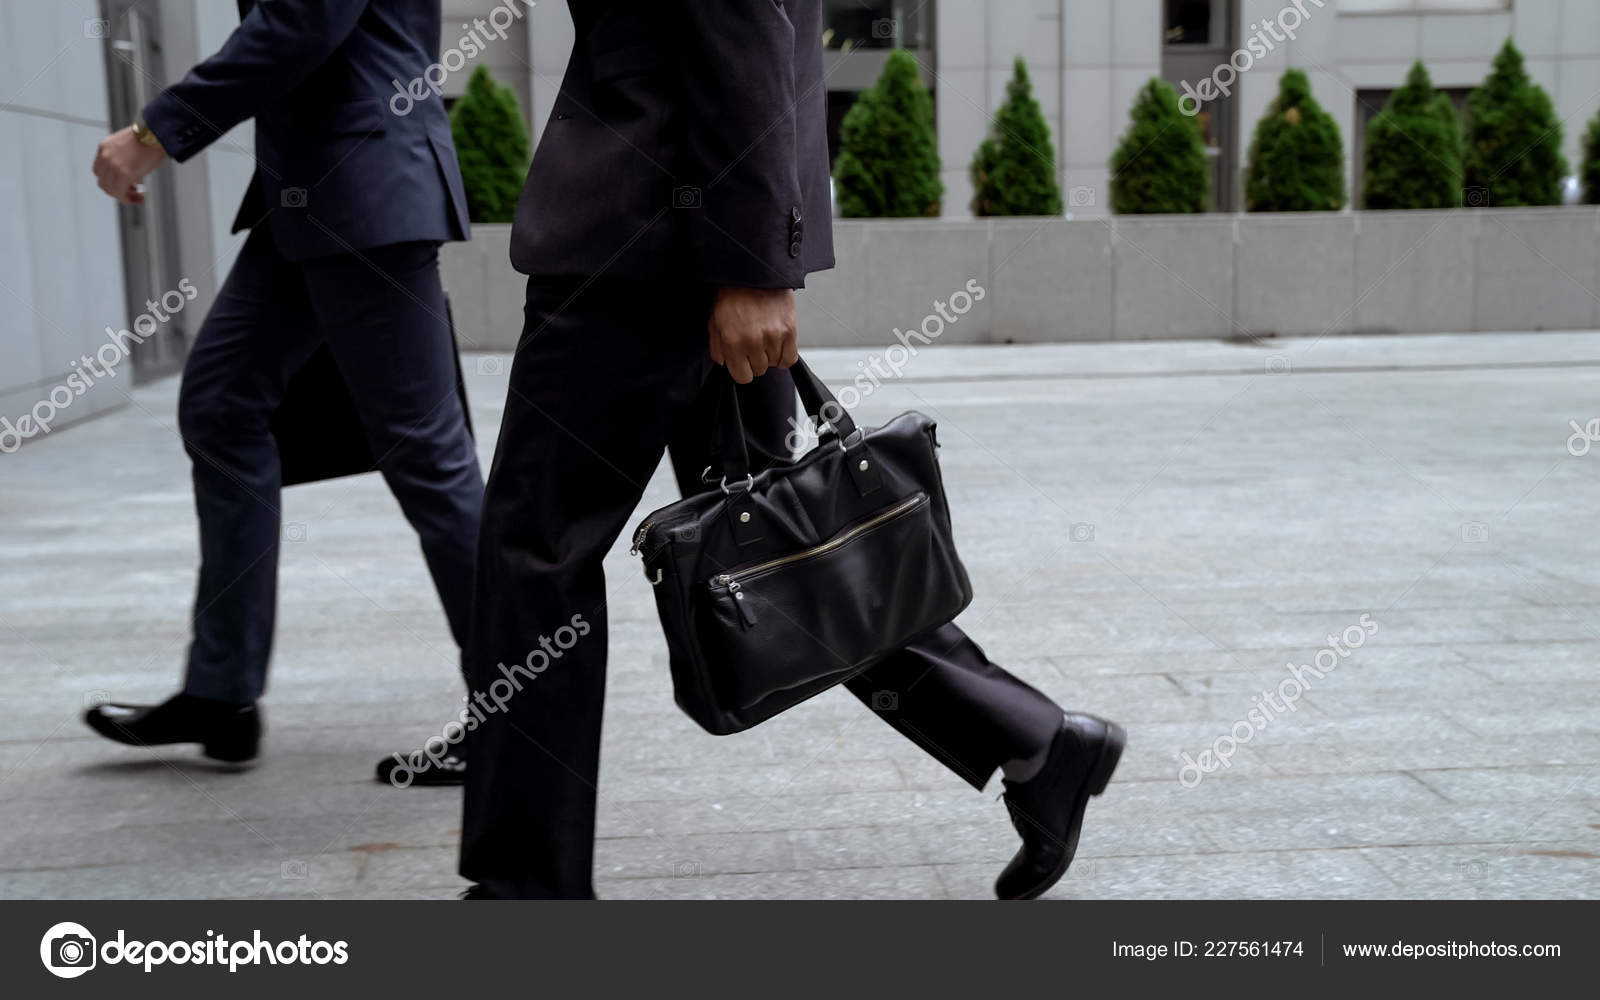 Why do bodyguards carry briefcase? #Shorts 